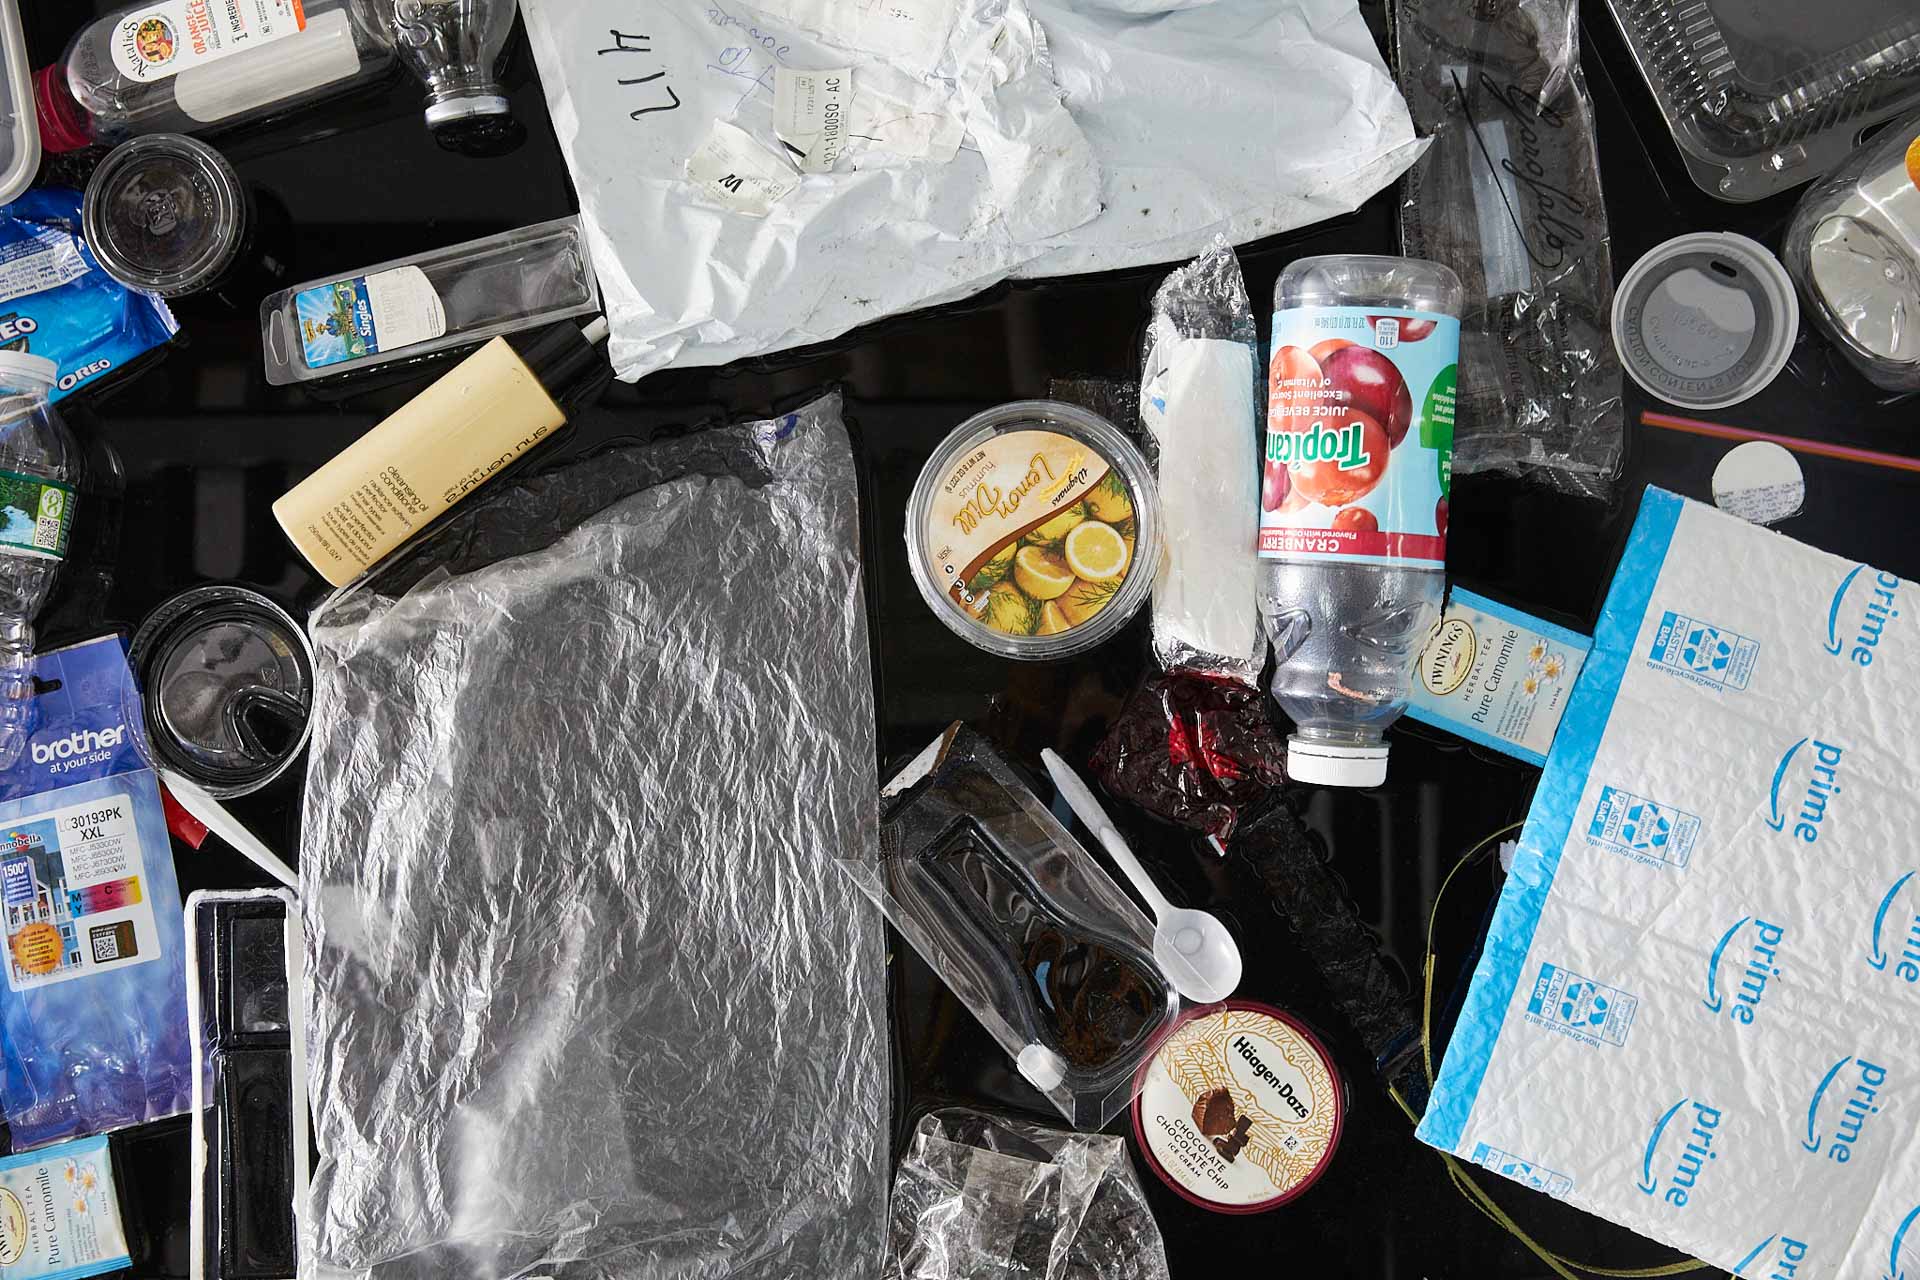 Another tight close up photograph of about 25 single-use plastic items floating on black water. Most prominently featured is a Tropican cranberry juice bottle, Lemon dill hummos container, and a Chocolate Chocolate Chip Haagen Dazs lid.